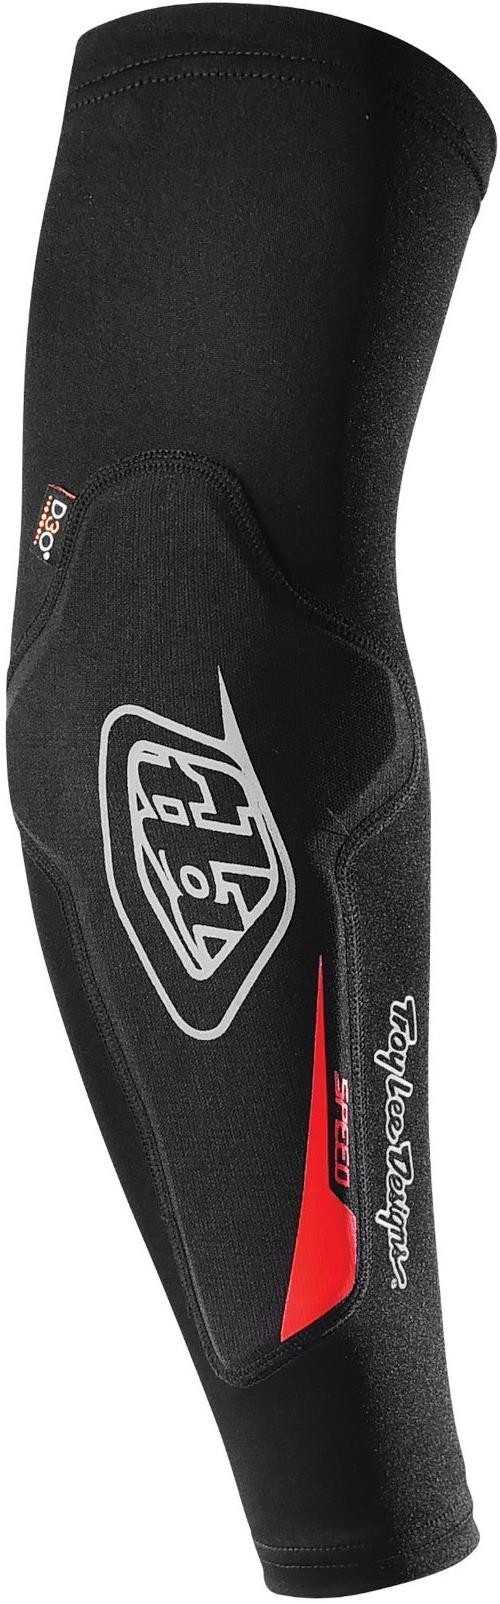 Speed Youth MTB Cycling Elbow Sleeves image 1